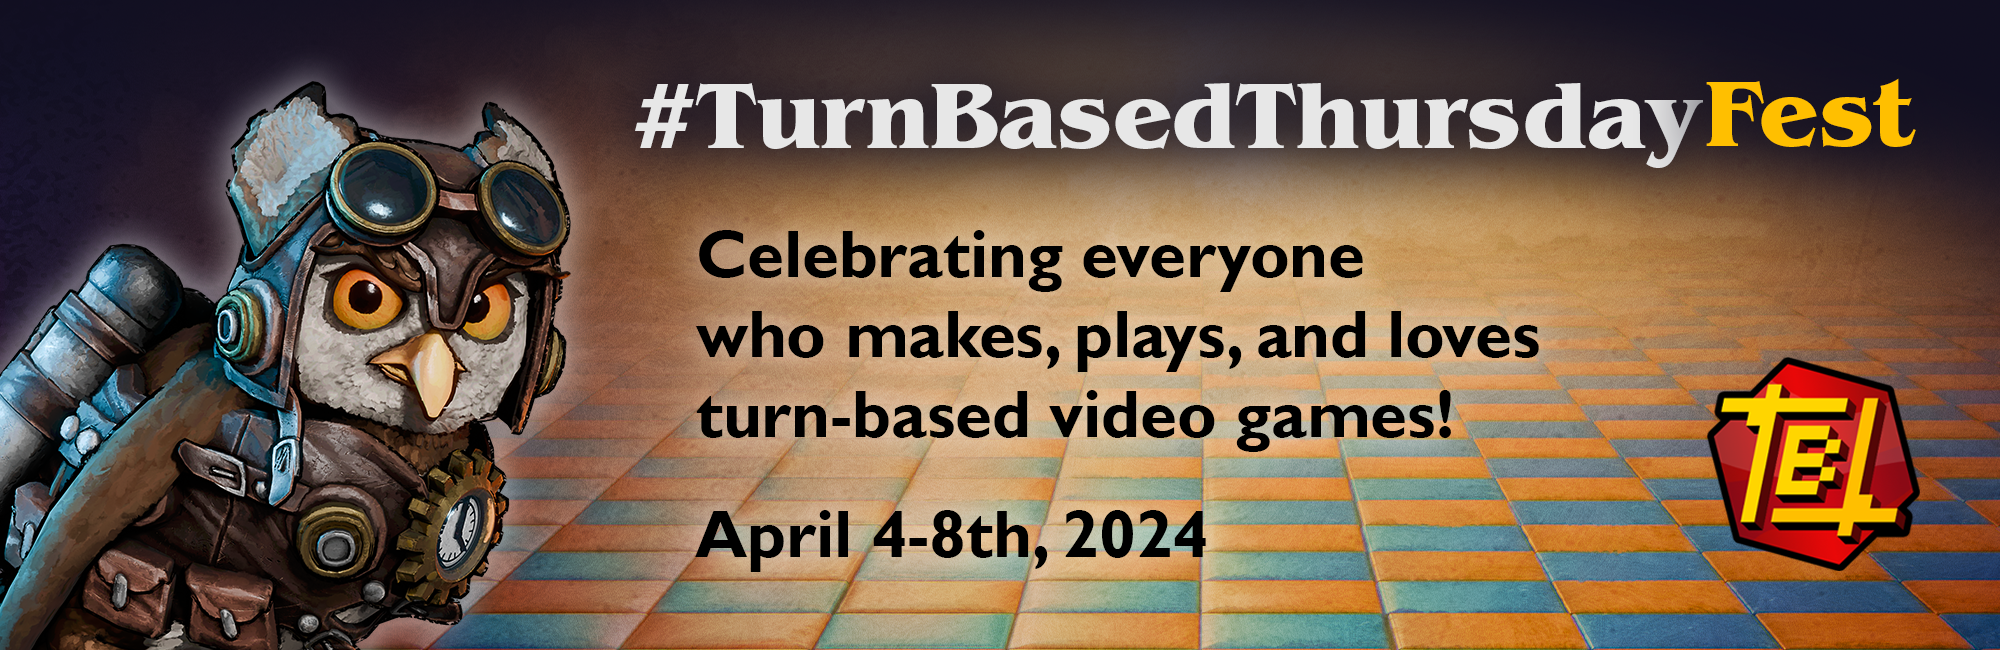 #TurnBasedThursdayFest banner with owl illustration. Owl is wearing a steampunk-ish jetpack and leather pilot outfit with cap and goggles, and a large clock inside of a cog on its chest. "Celebrating everyone who makes, plays, and loves turn-based video games! April 4th-8th, 2024."